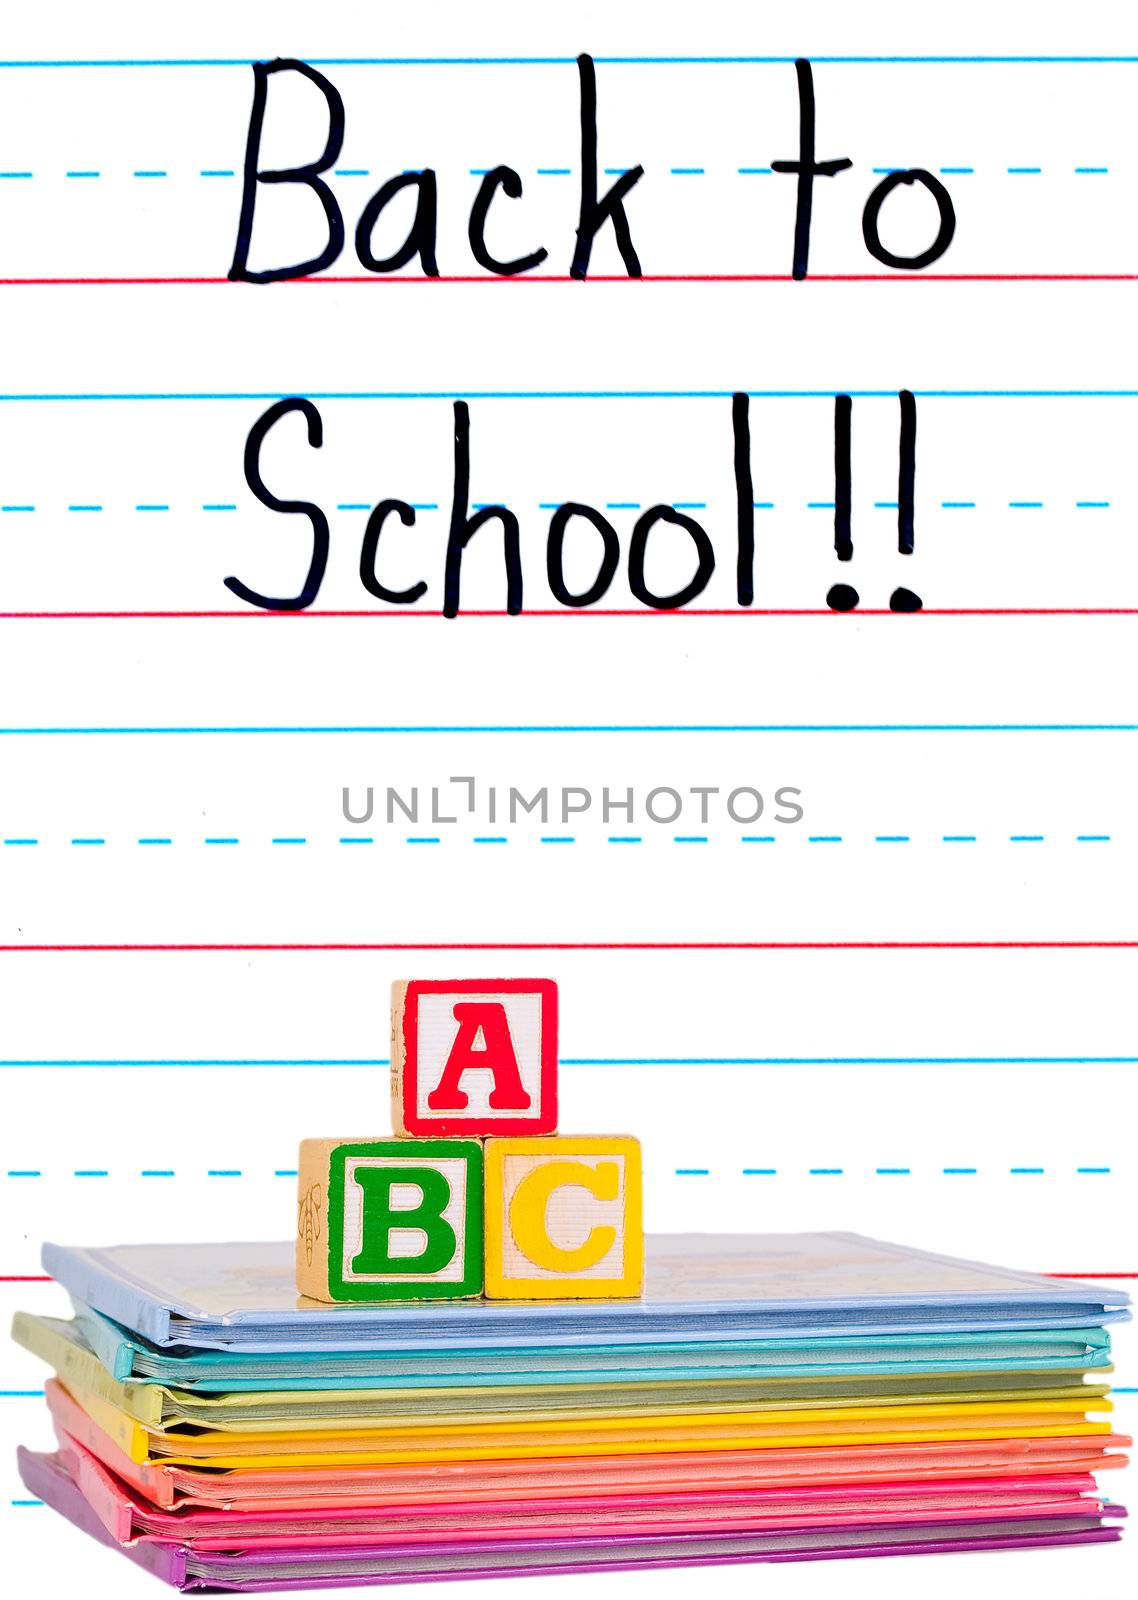 Back to School Written on a Lined Dry Erase Board with Books